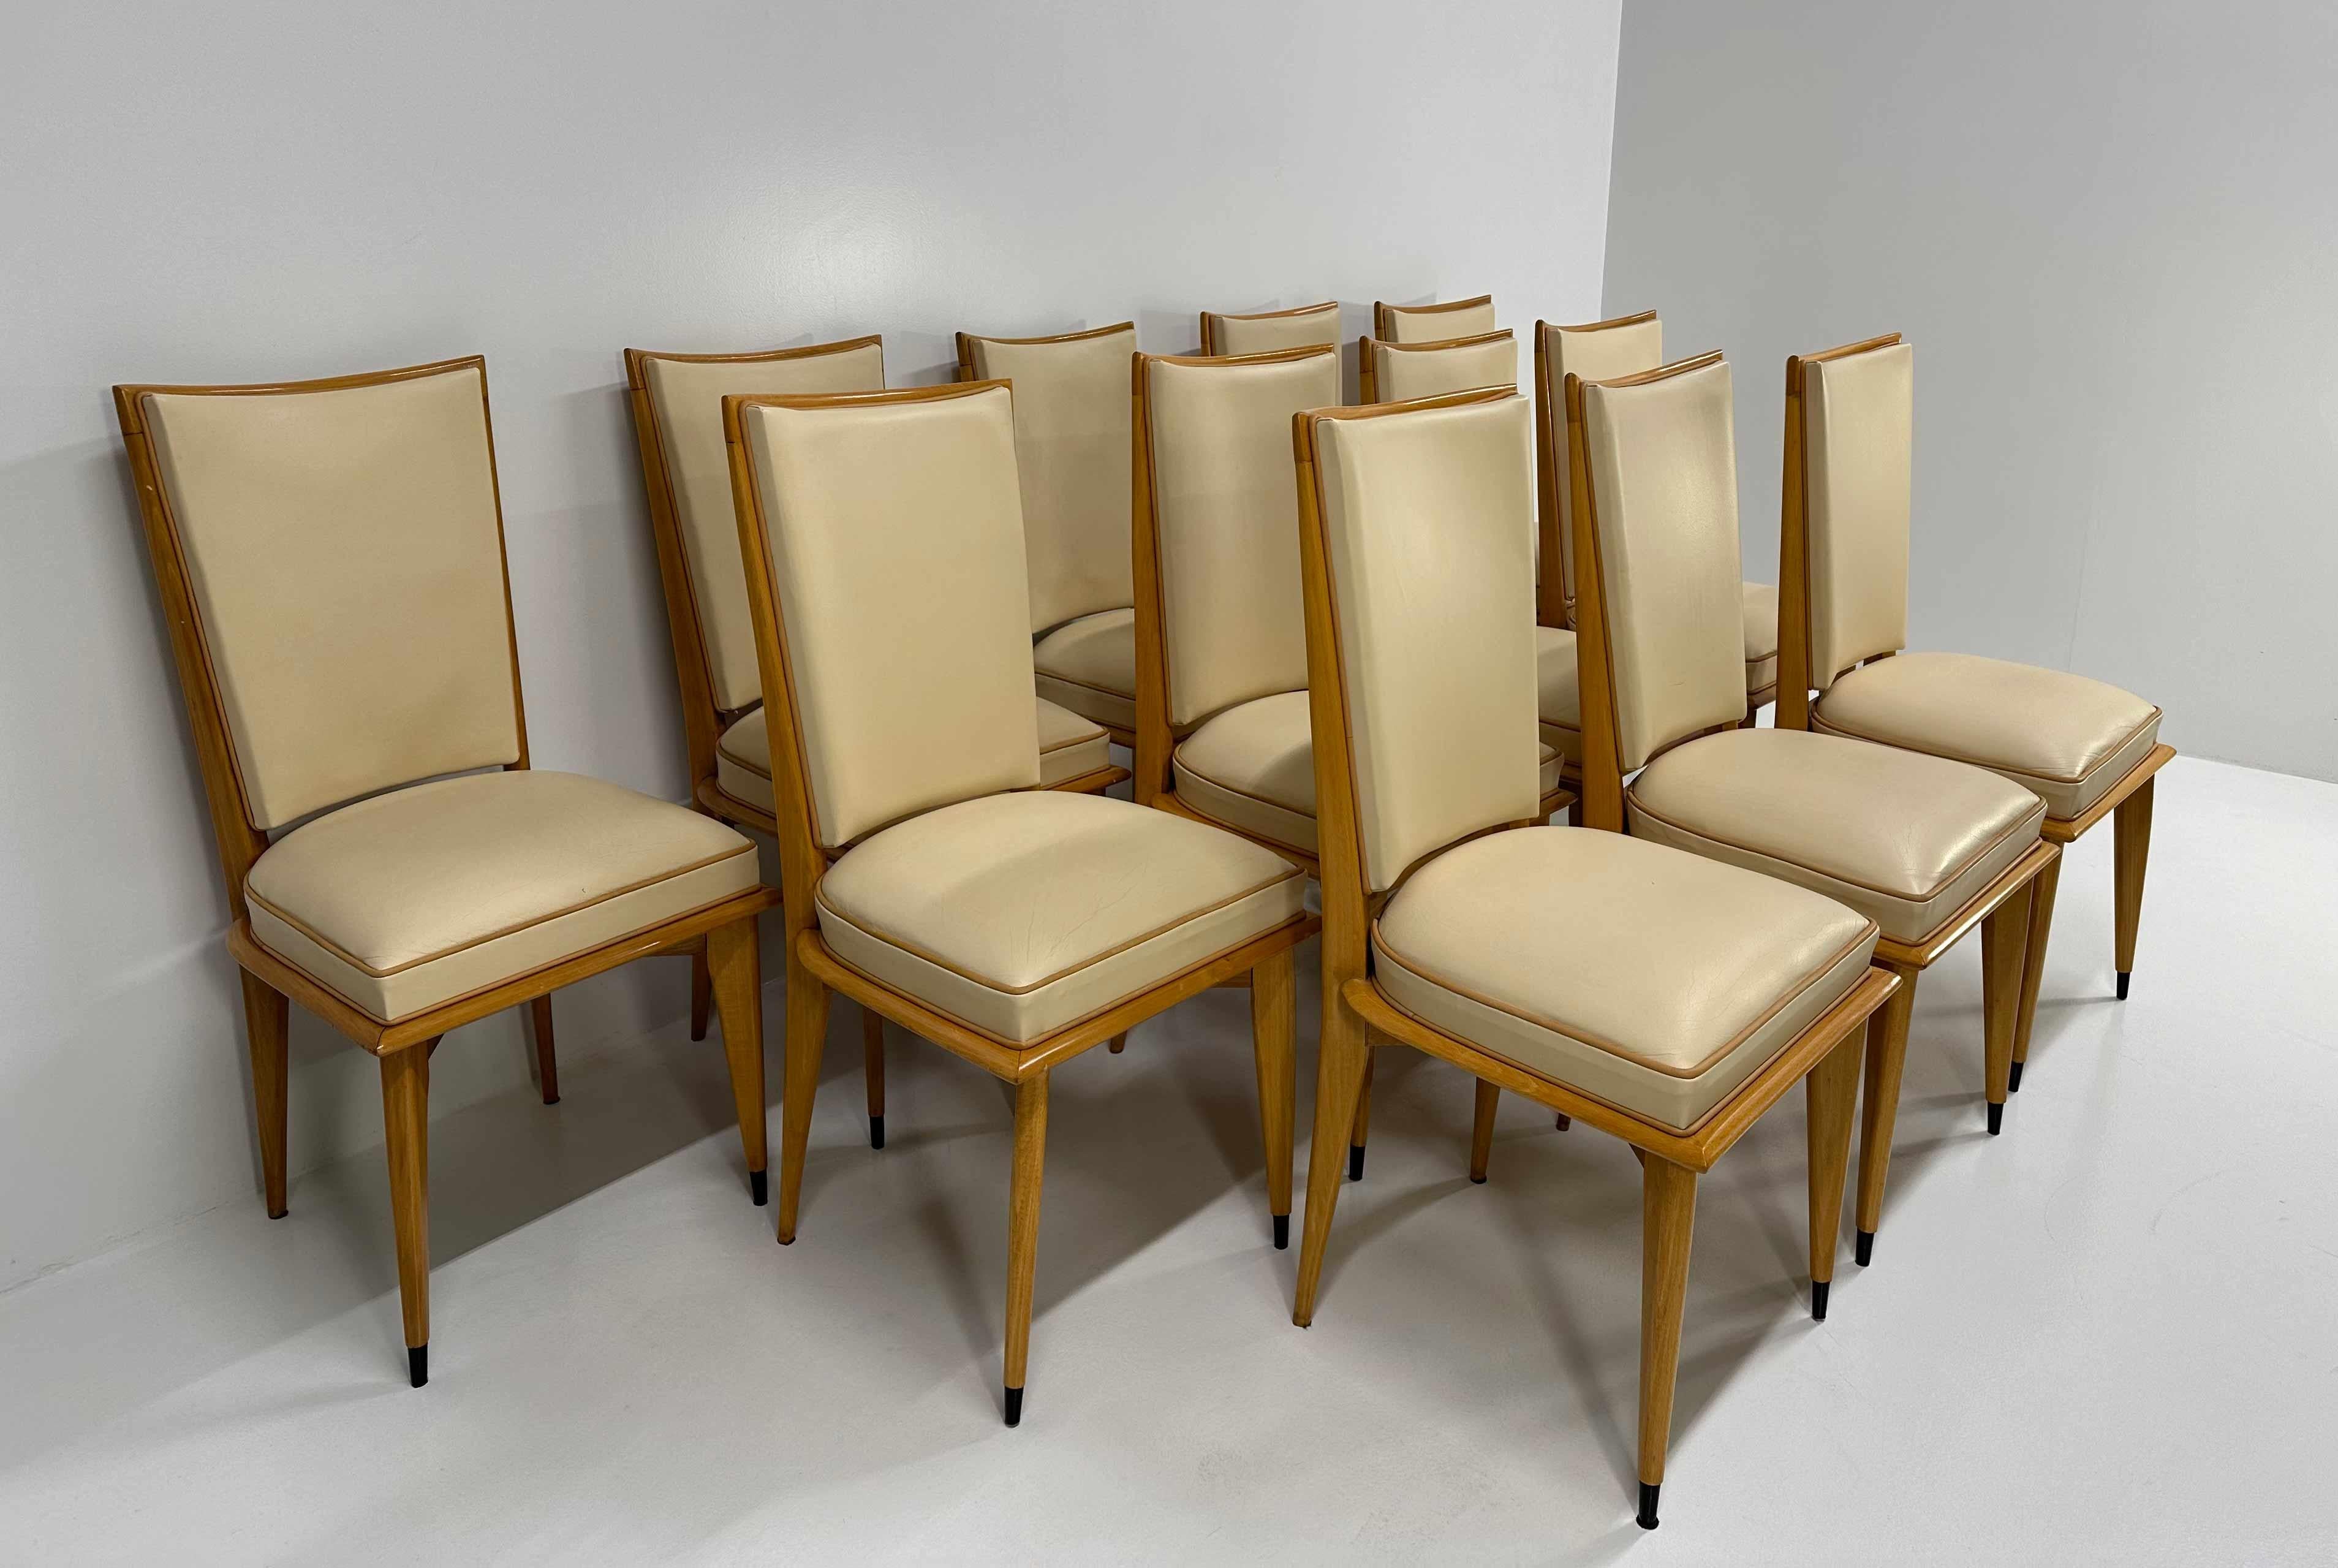 Mid-20th Century French Art Deco Set of 12 Chairs in Maple and Cream Leather, 1930s For Sale